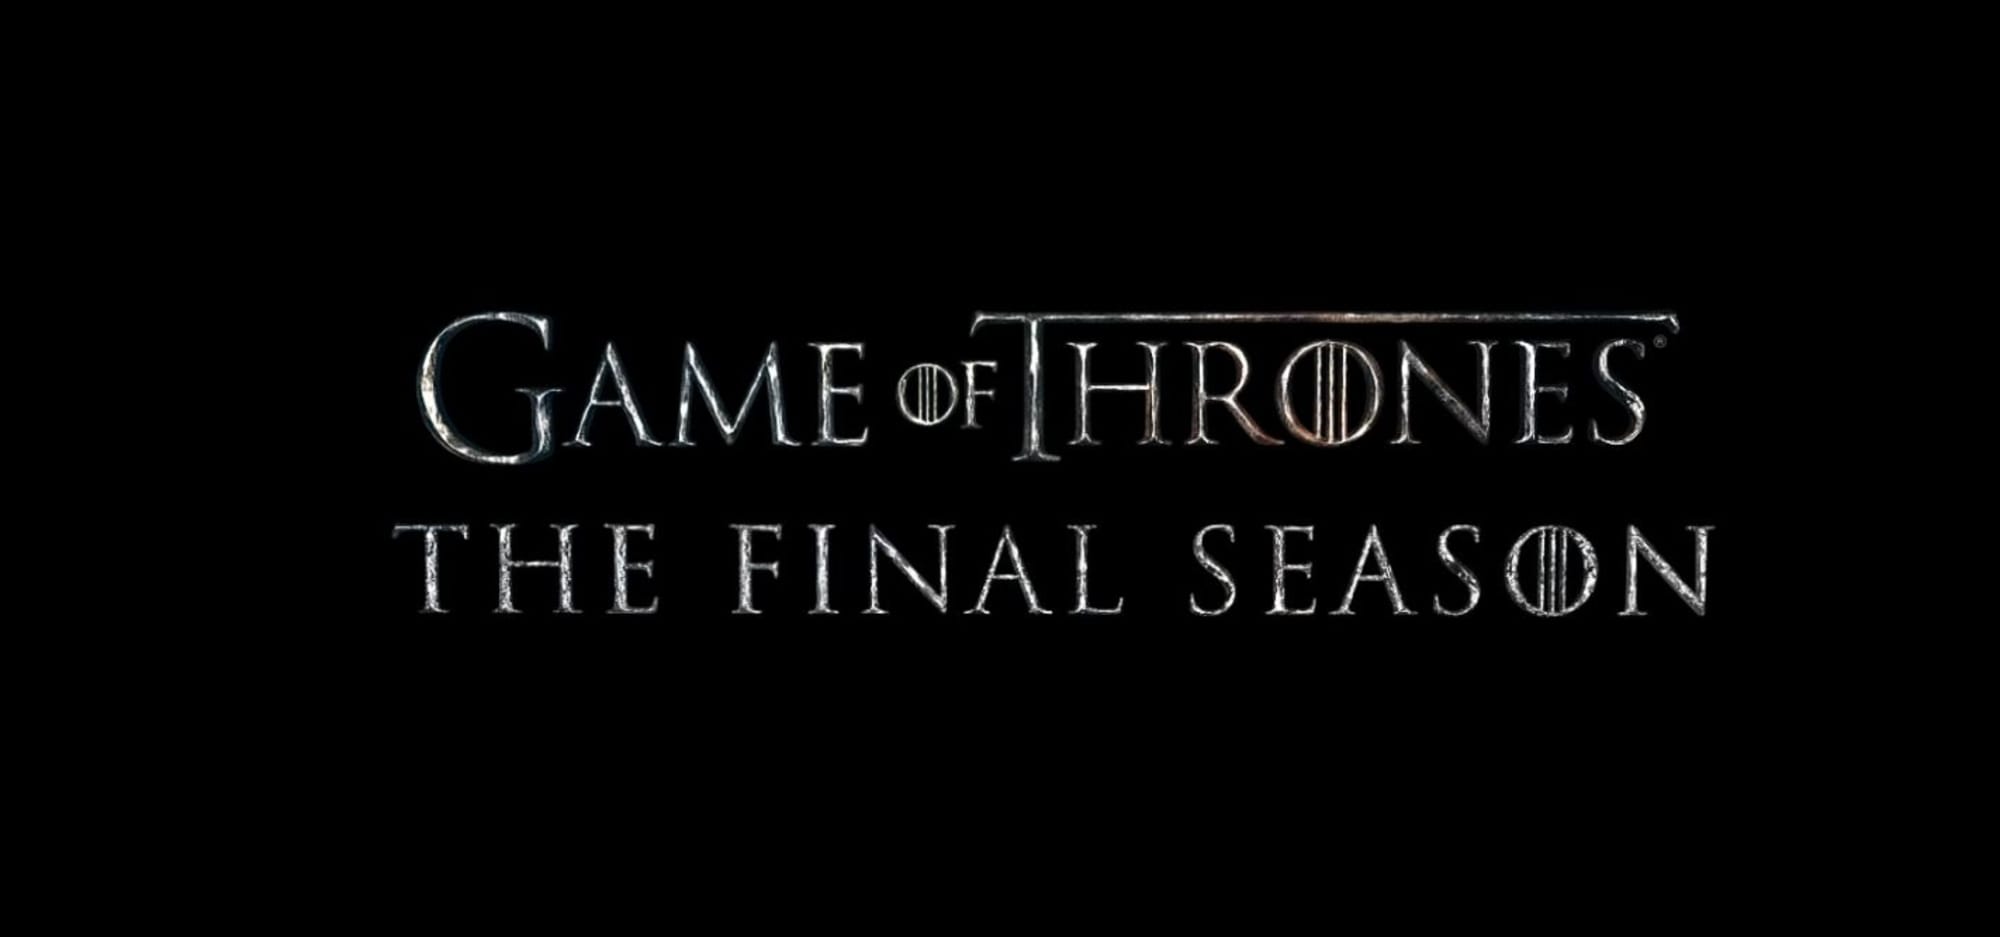 game of thrones font download word